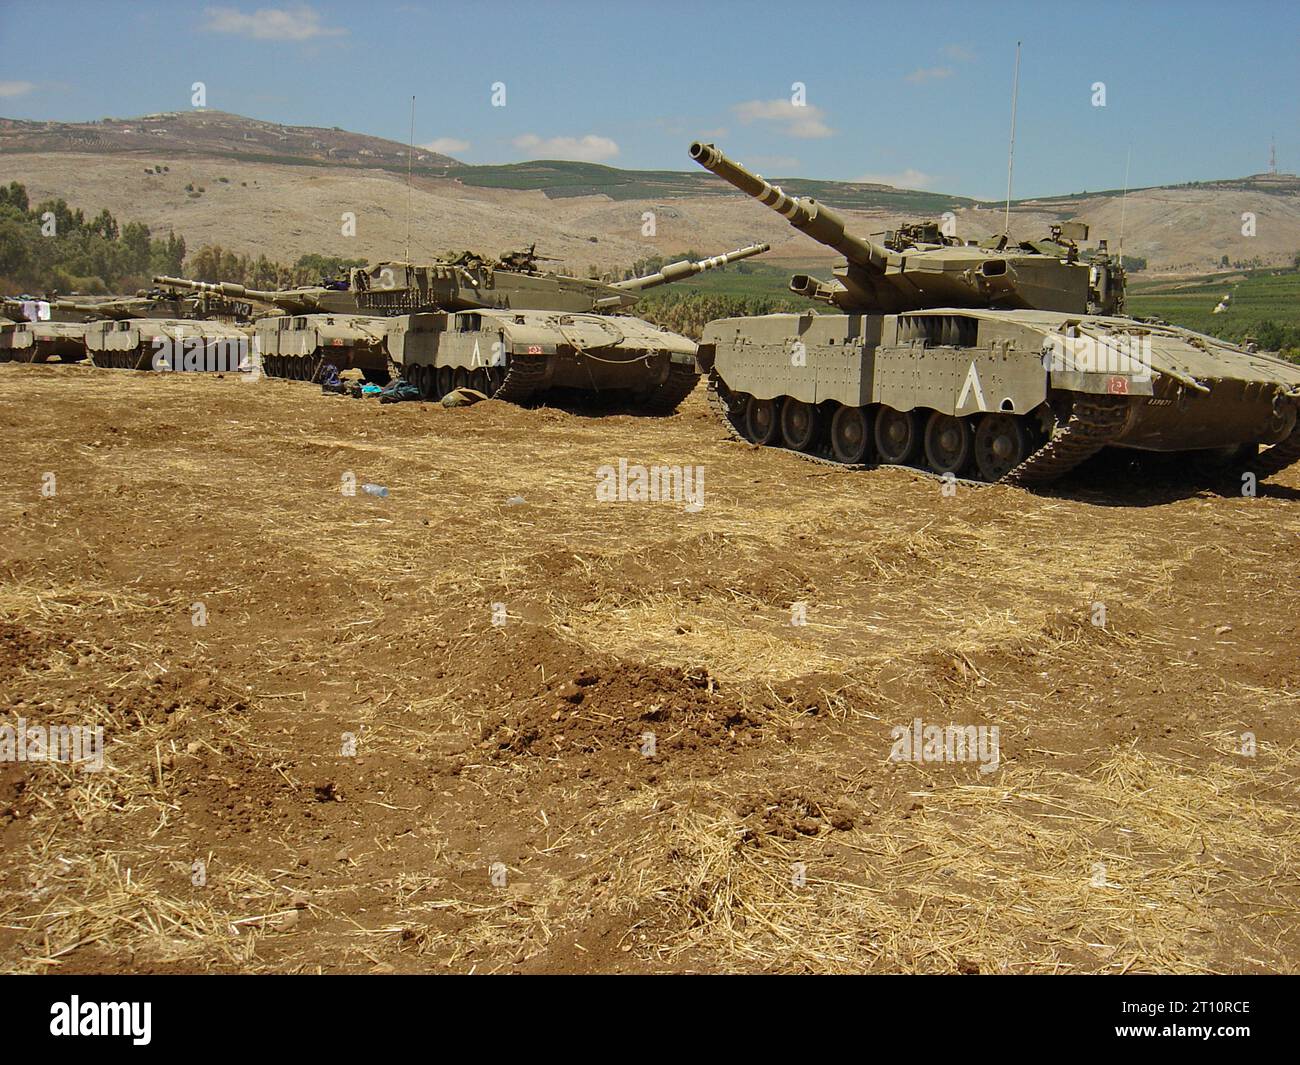 14th August 2006 The Israel-Hezbollah War 2006. After a ceasefire was announced at 08:00, Israeli Merkava 3 (Chariot) tanks are parked up just off the main road between Kfar Blum and Metula in the north-east of Israel. Stock Photo